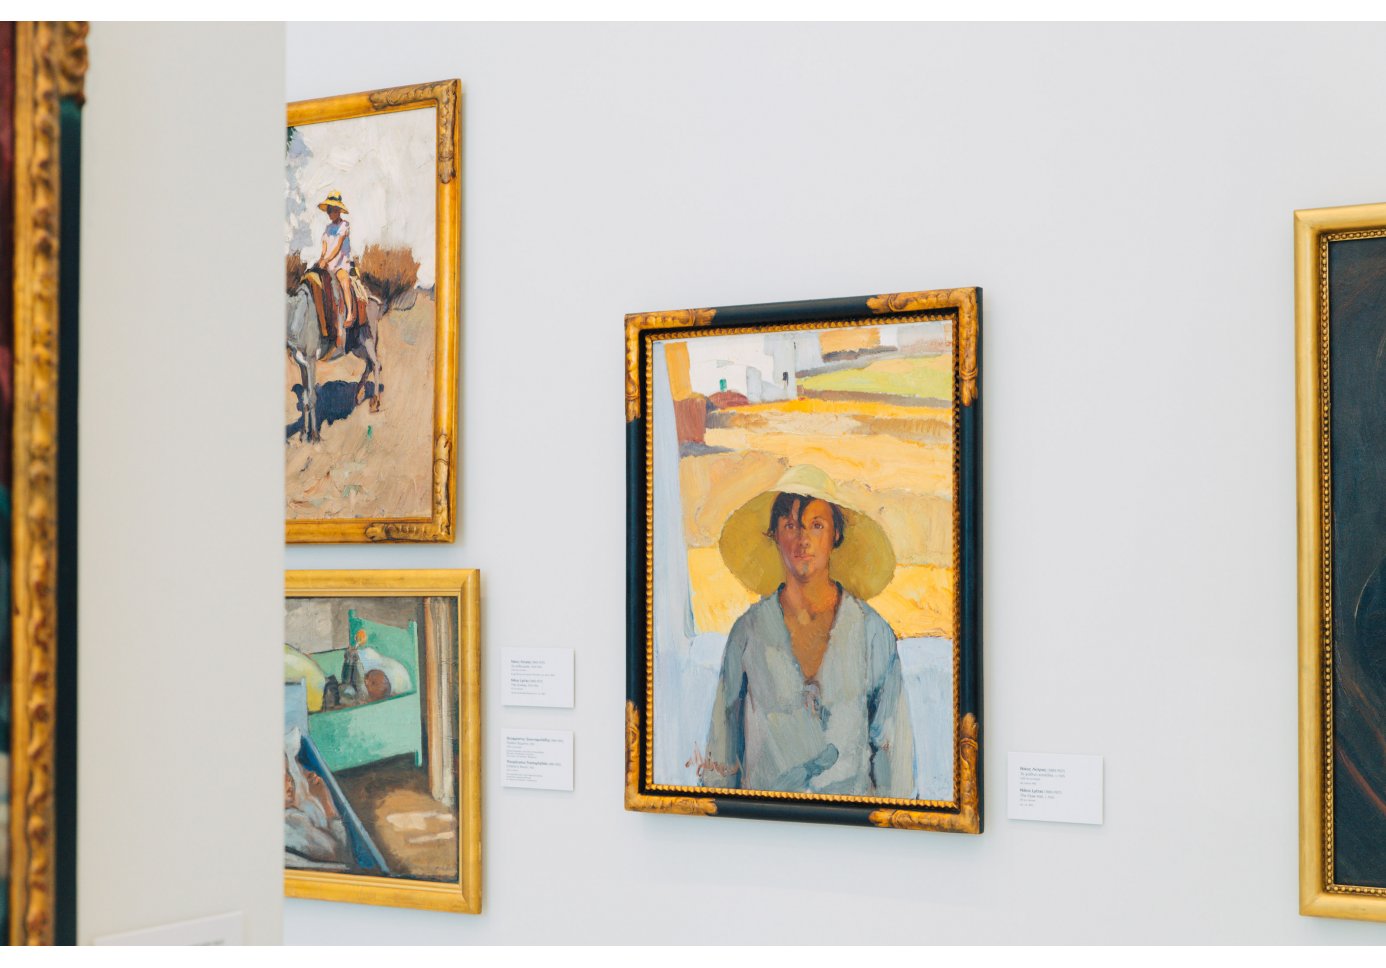 The Straw Hat by Nikos Lytras at the National Gallery of Greece in Athens